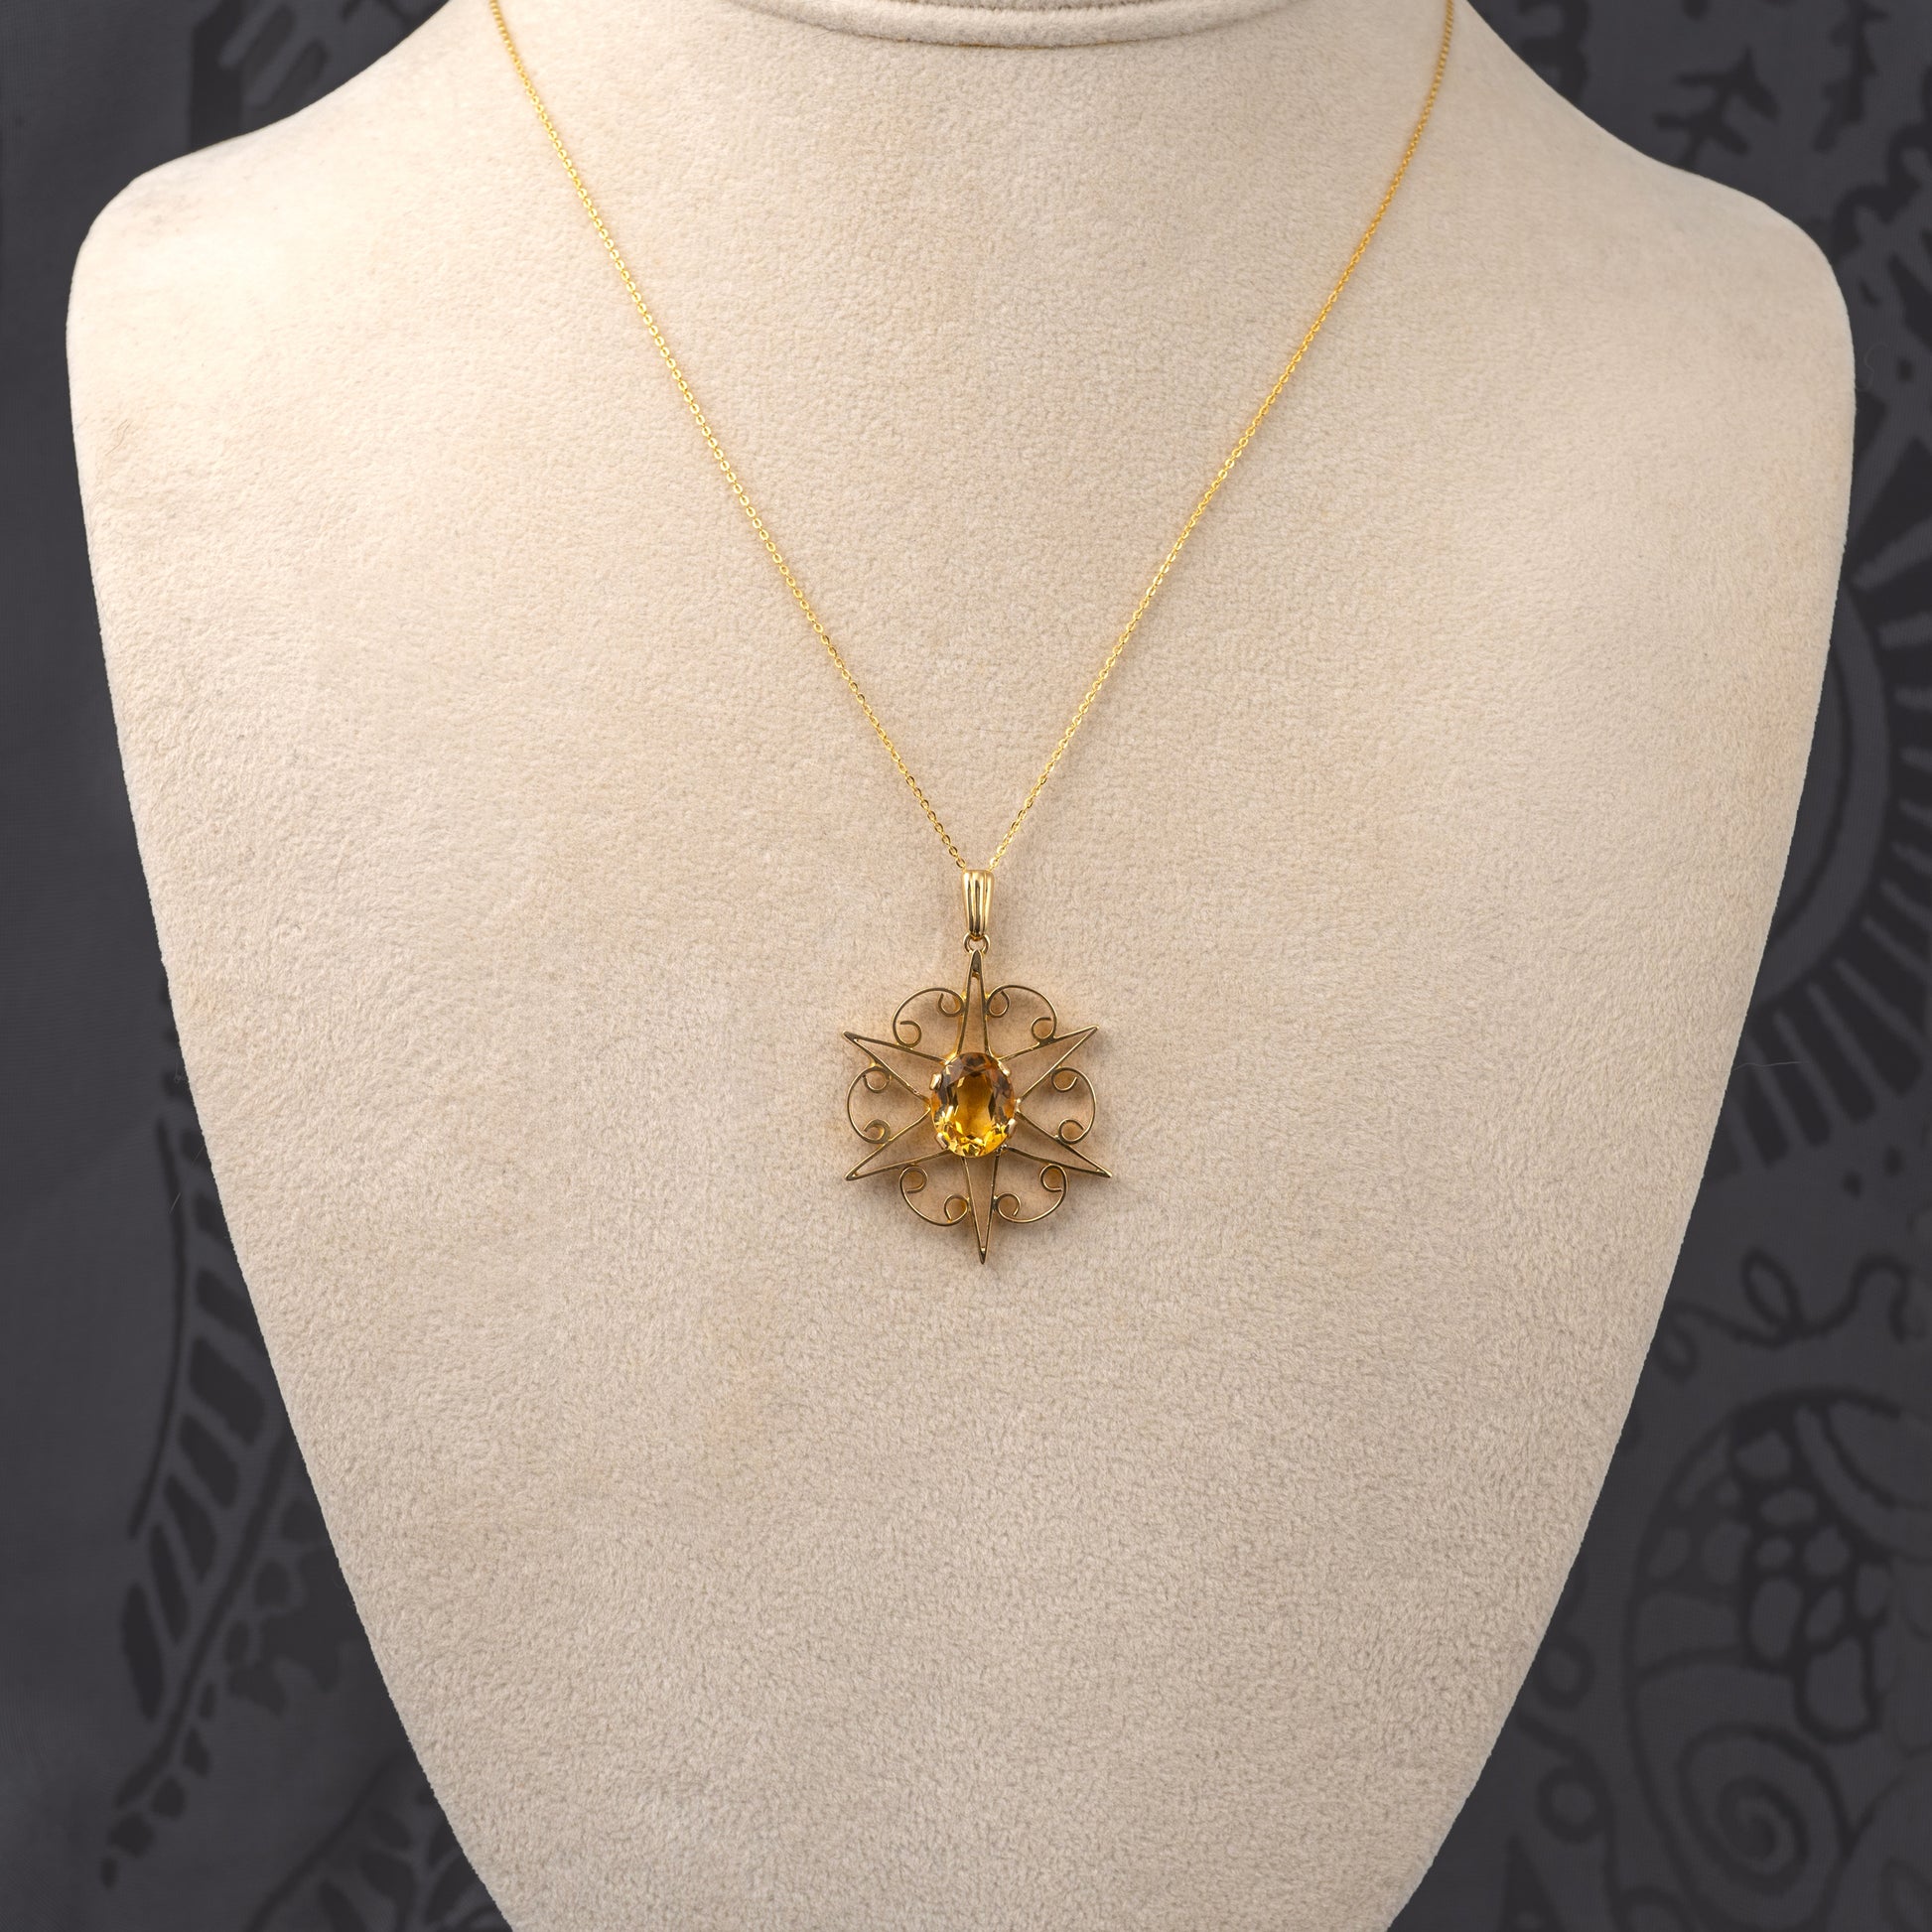 Pre-owned Citrine Birthstone Pendant on Gold Chain